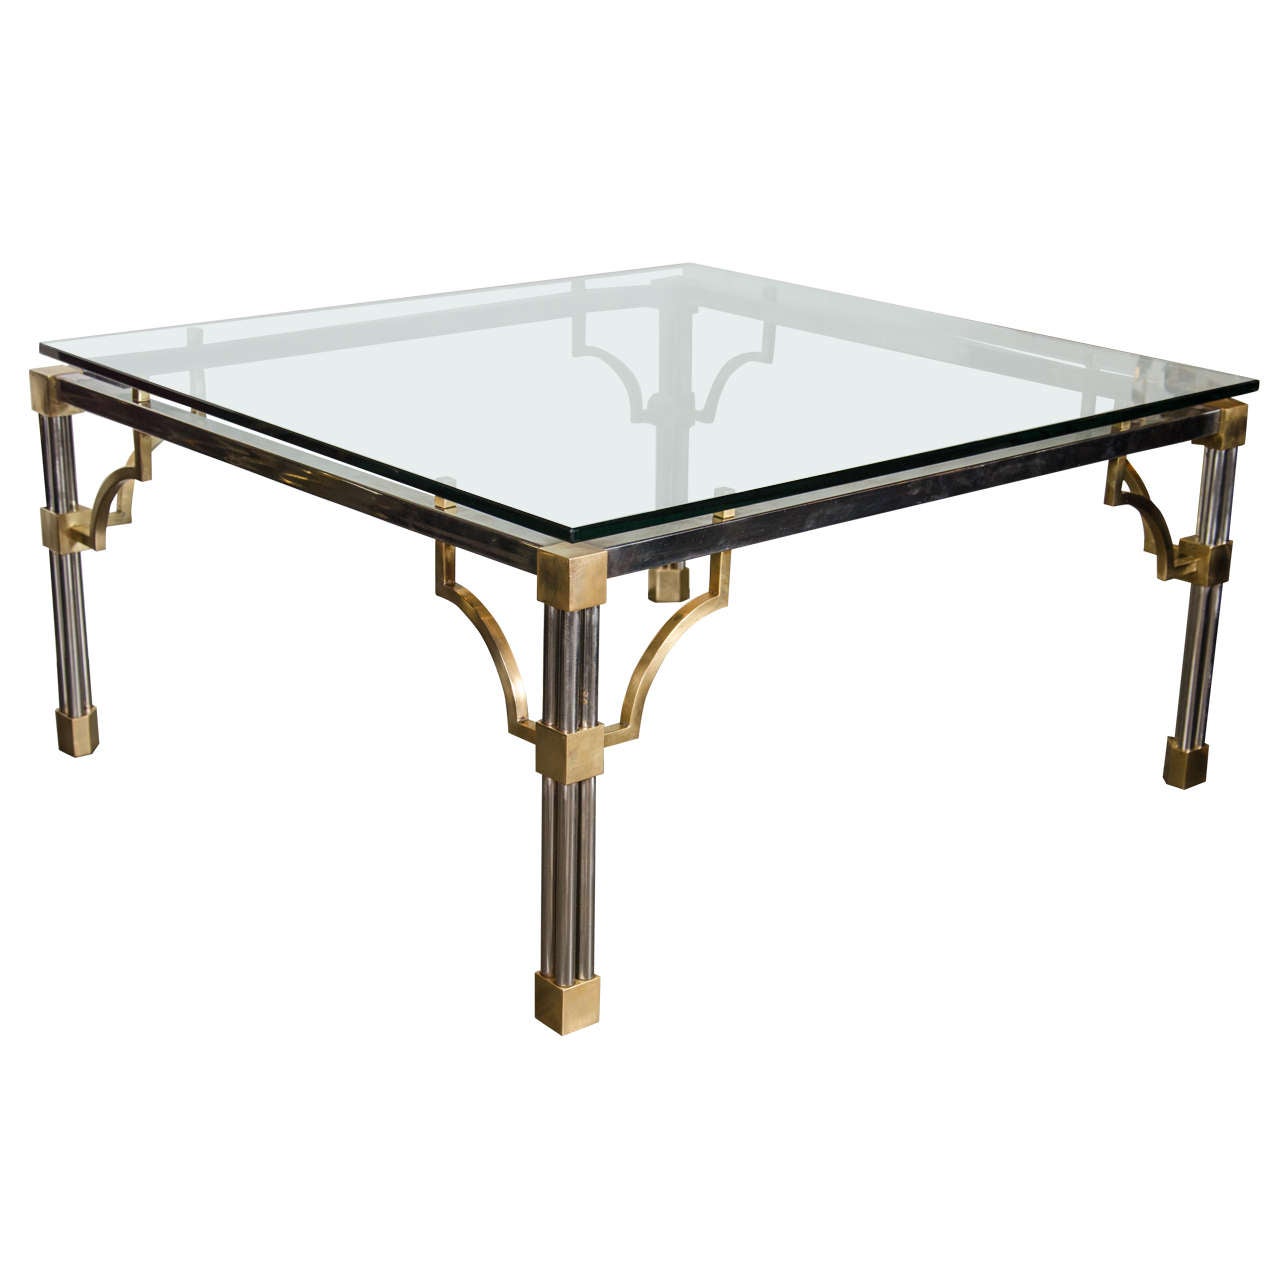 Mid-Century Modern Brushed Nickel and Brass Cocktail Table by John Vesey